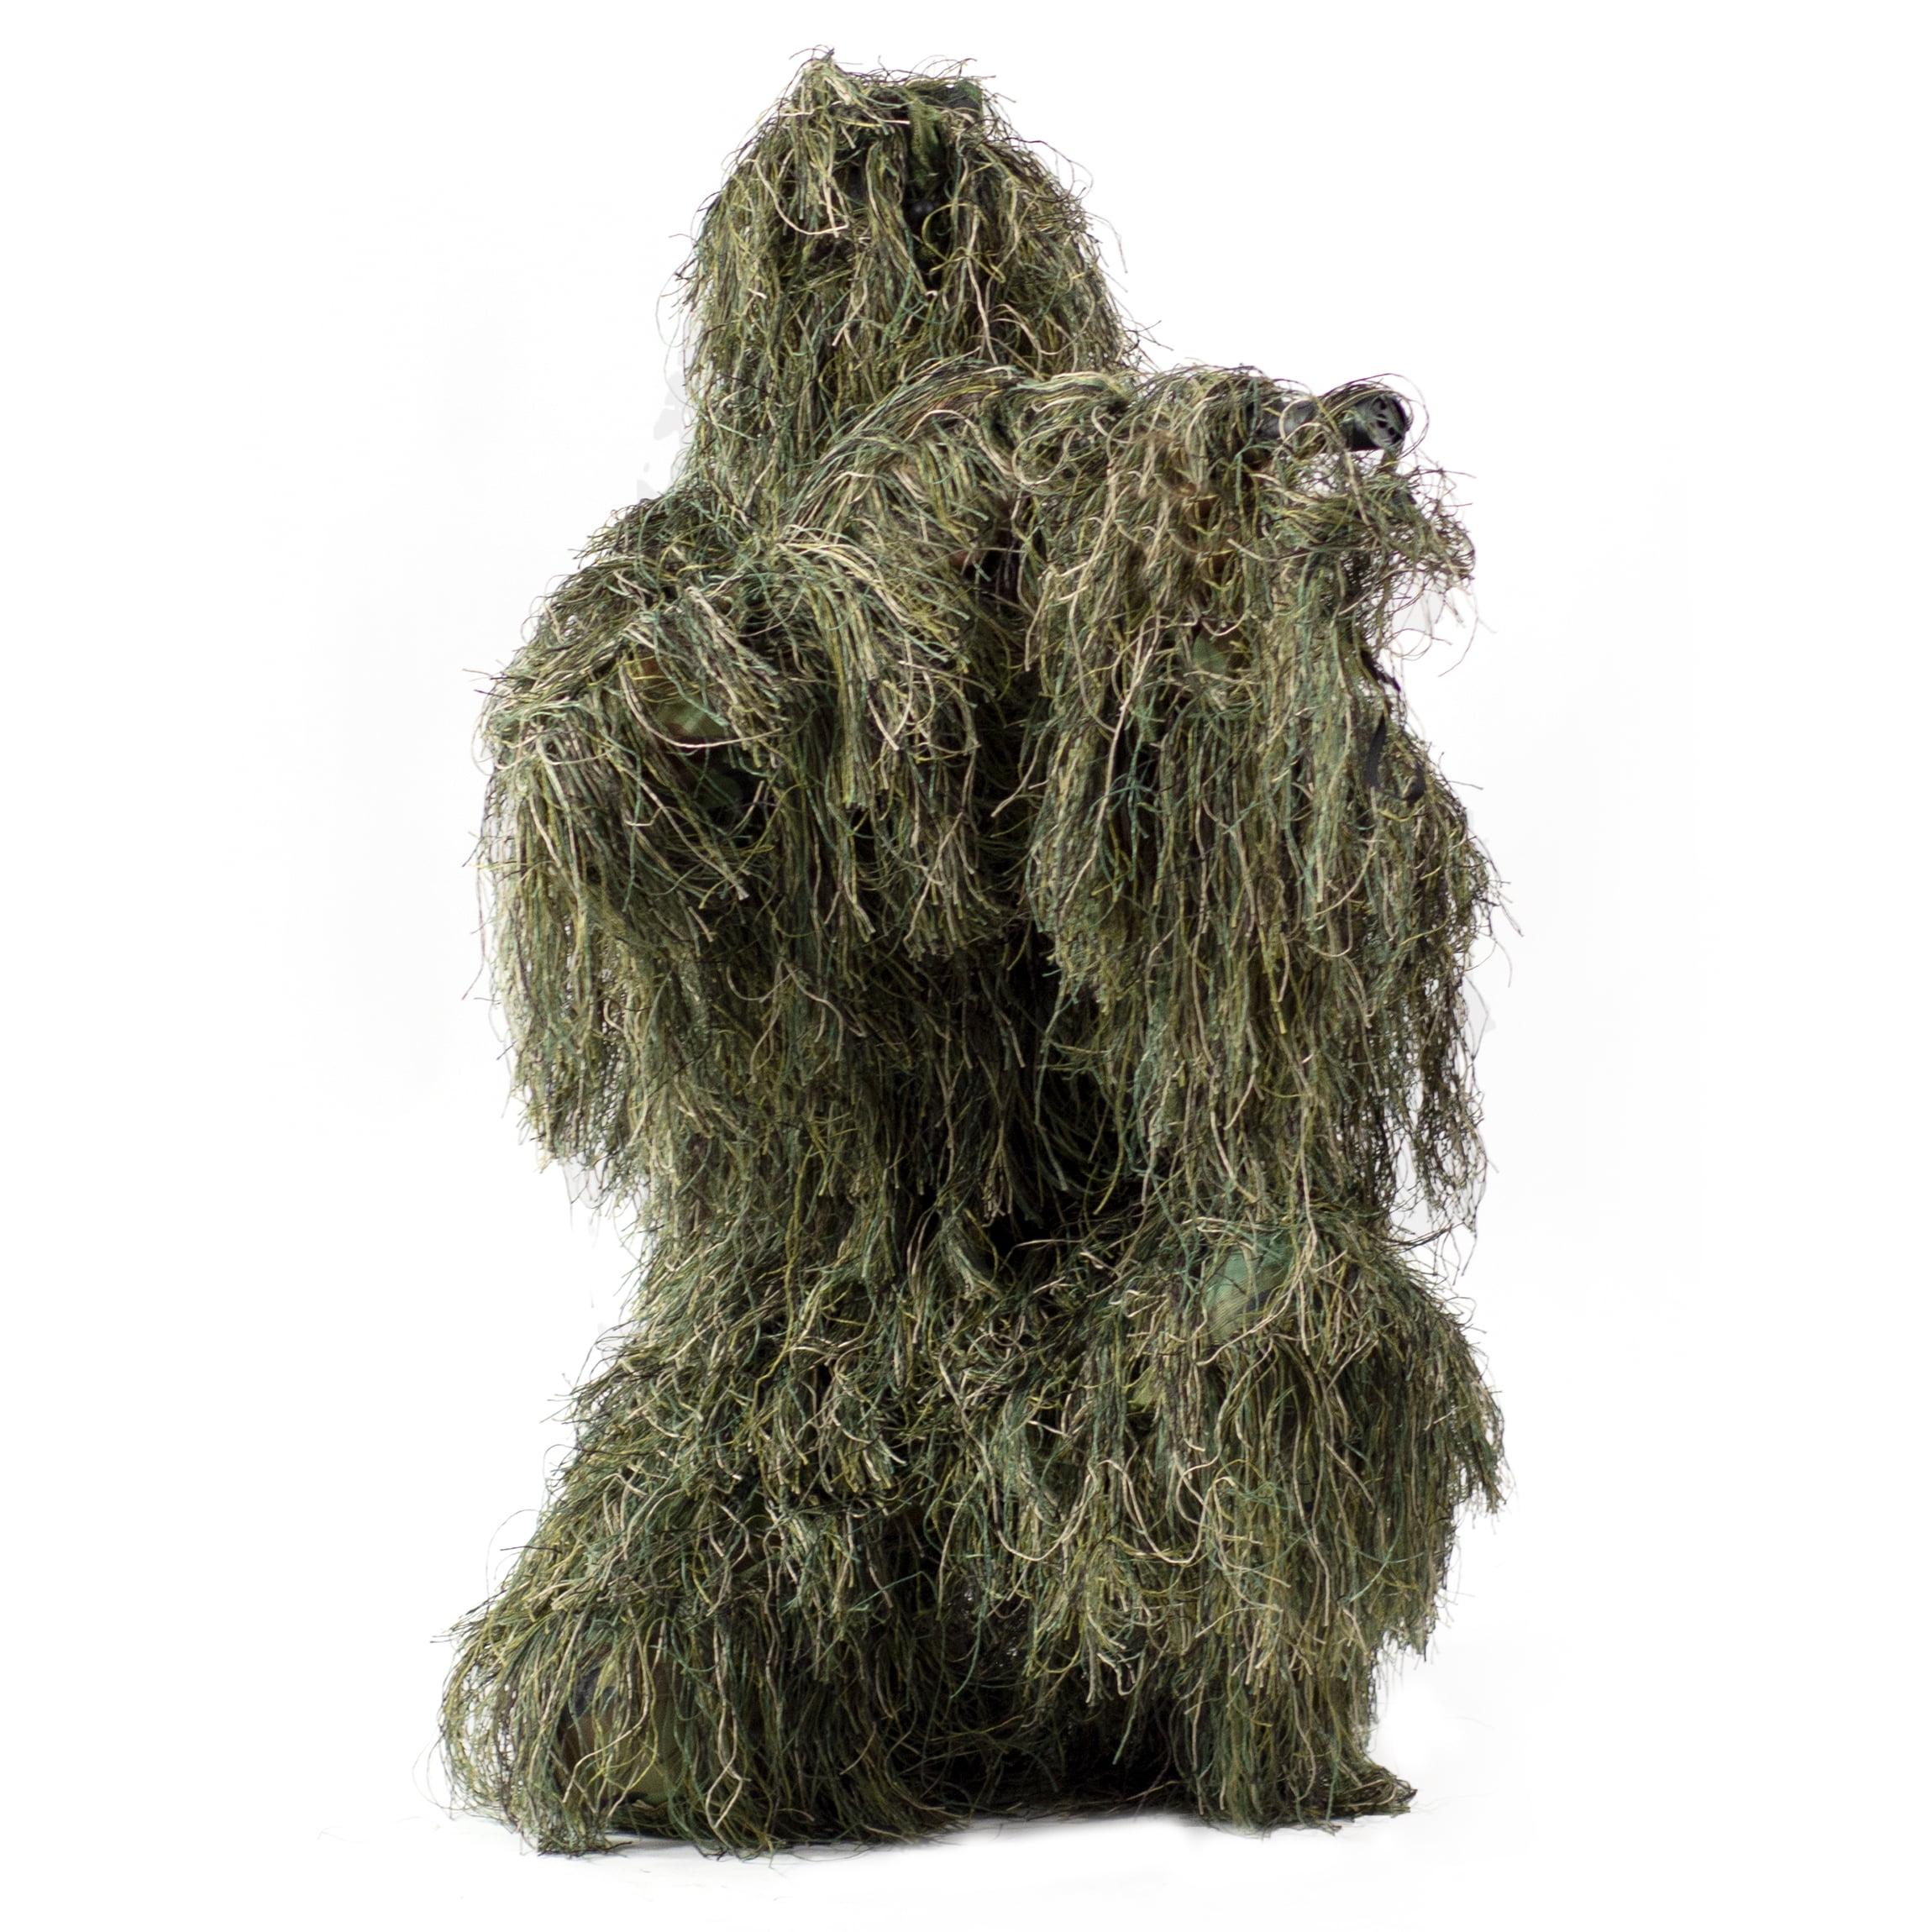 Details about   Unisex 3D Desert Jungle Camouflage Ghillie Suit Cloak Cape Hunting Outdoors Game 